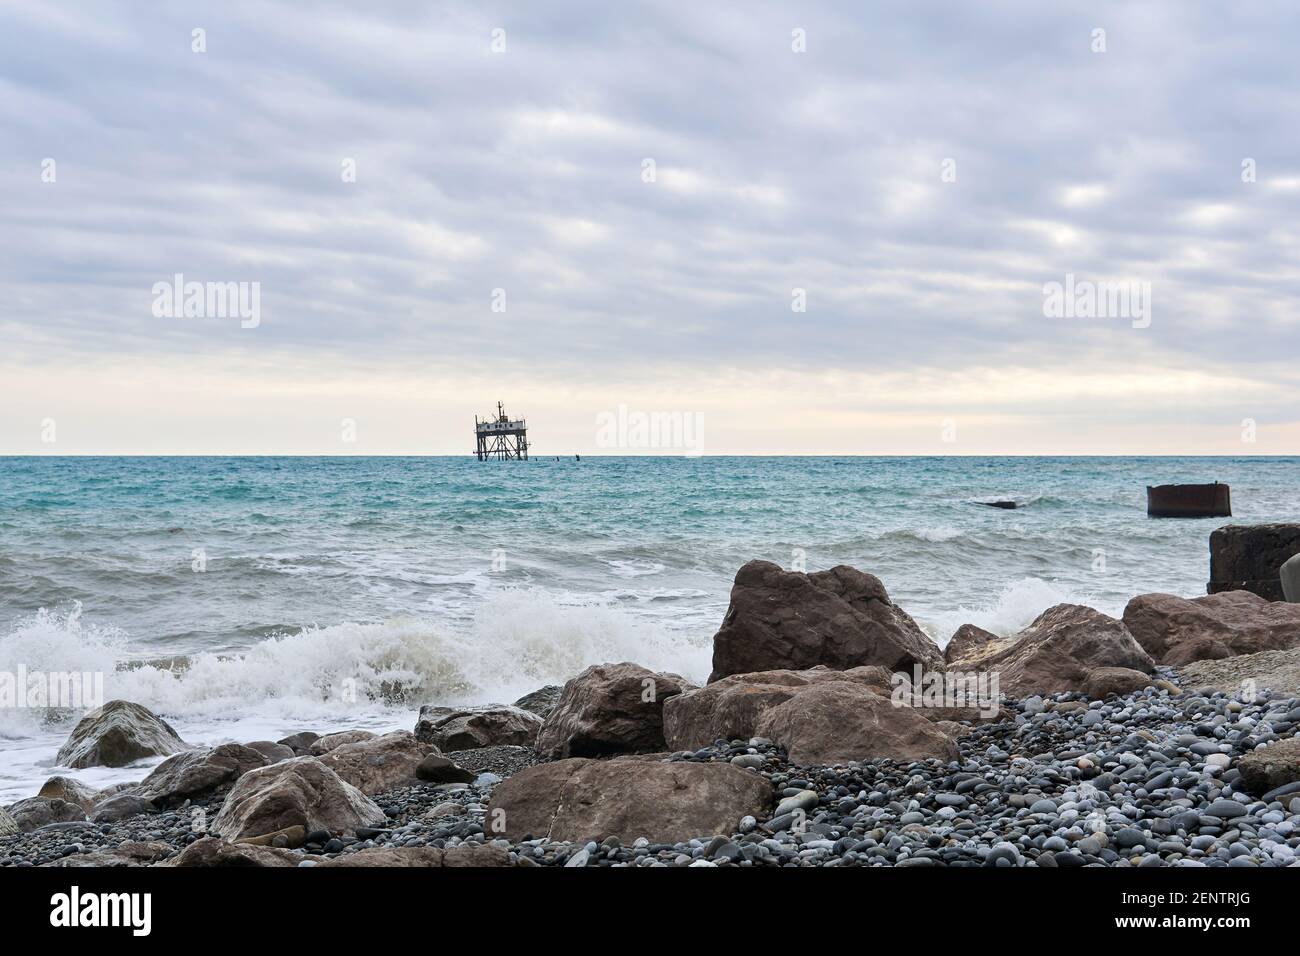 winter beach with seascape and a rickety structure on the stilts of an mariculture farm in the distance Stock Photo